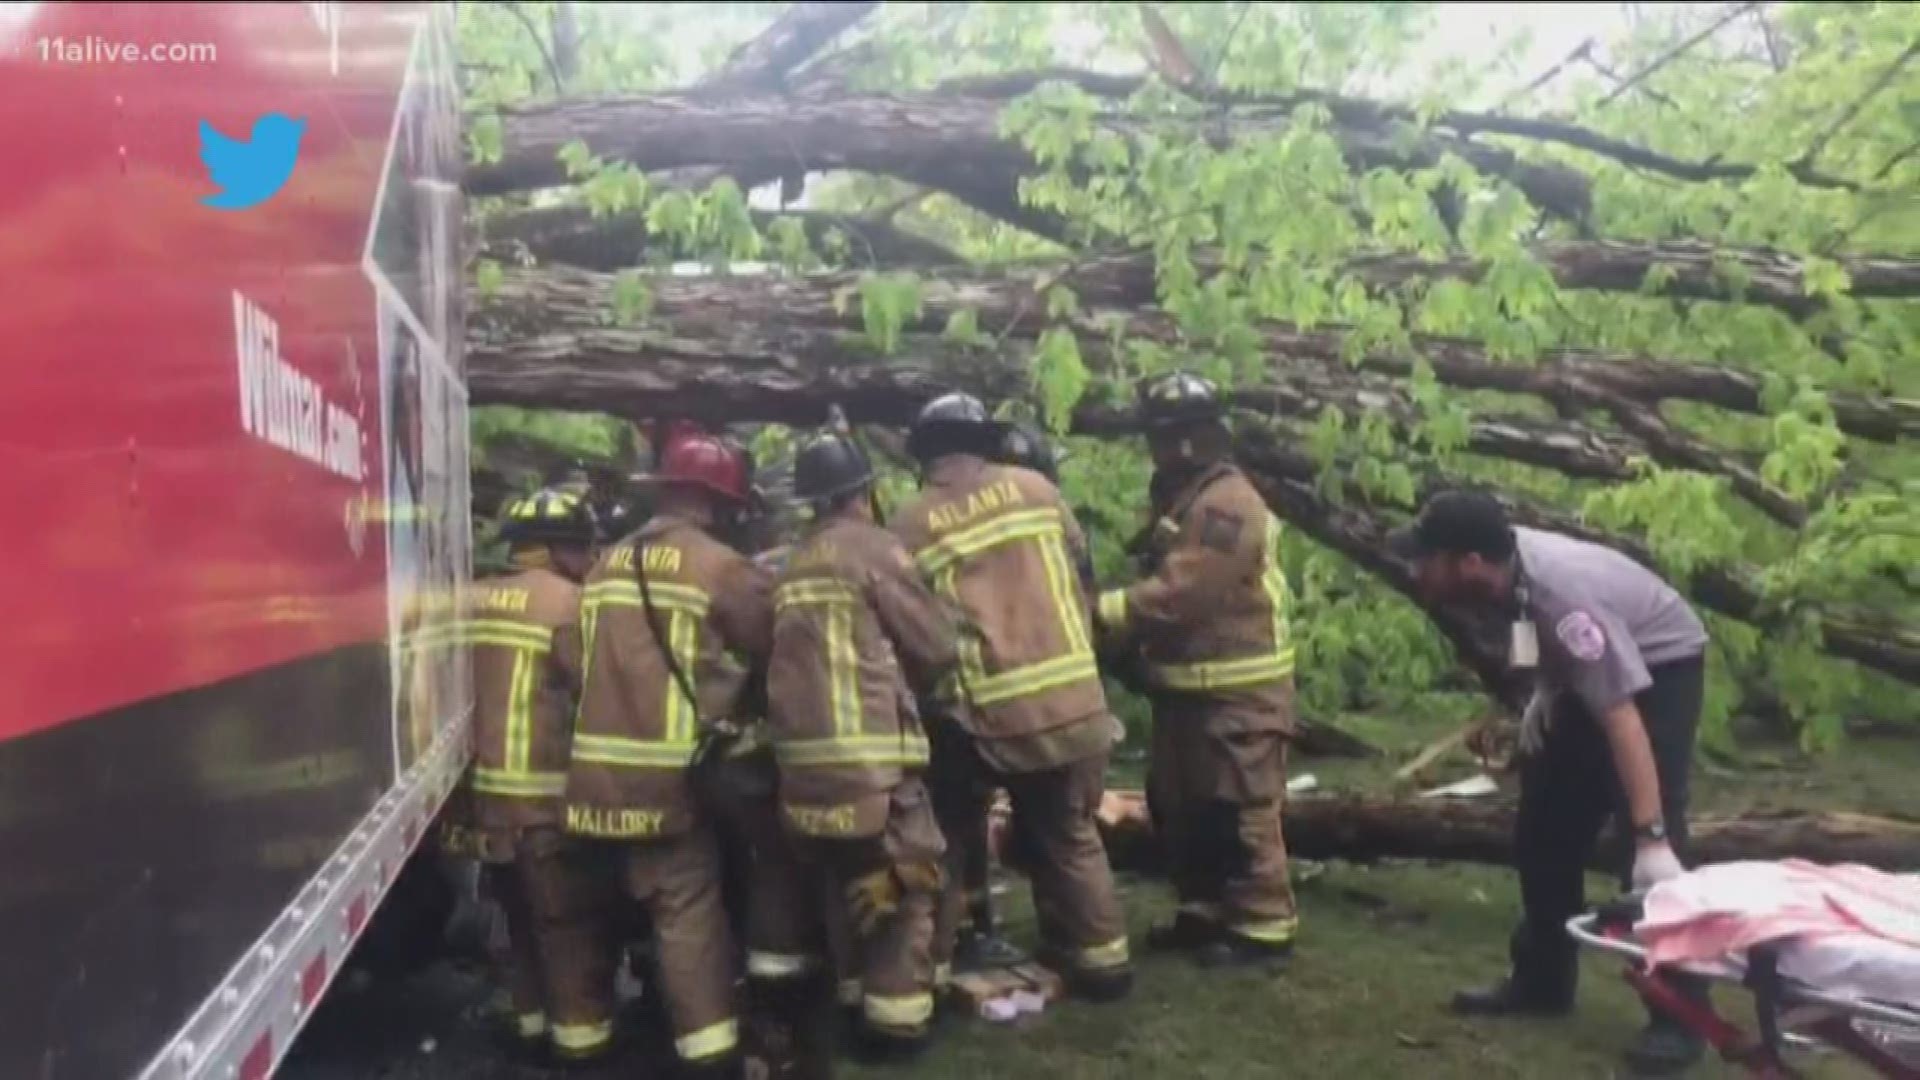 A large oak tree fell on the truck in Atlanta, police said.